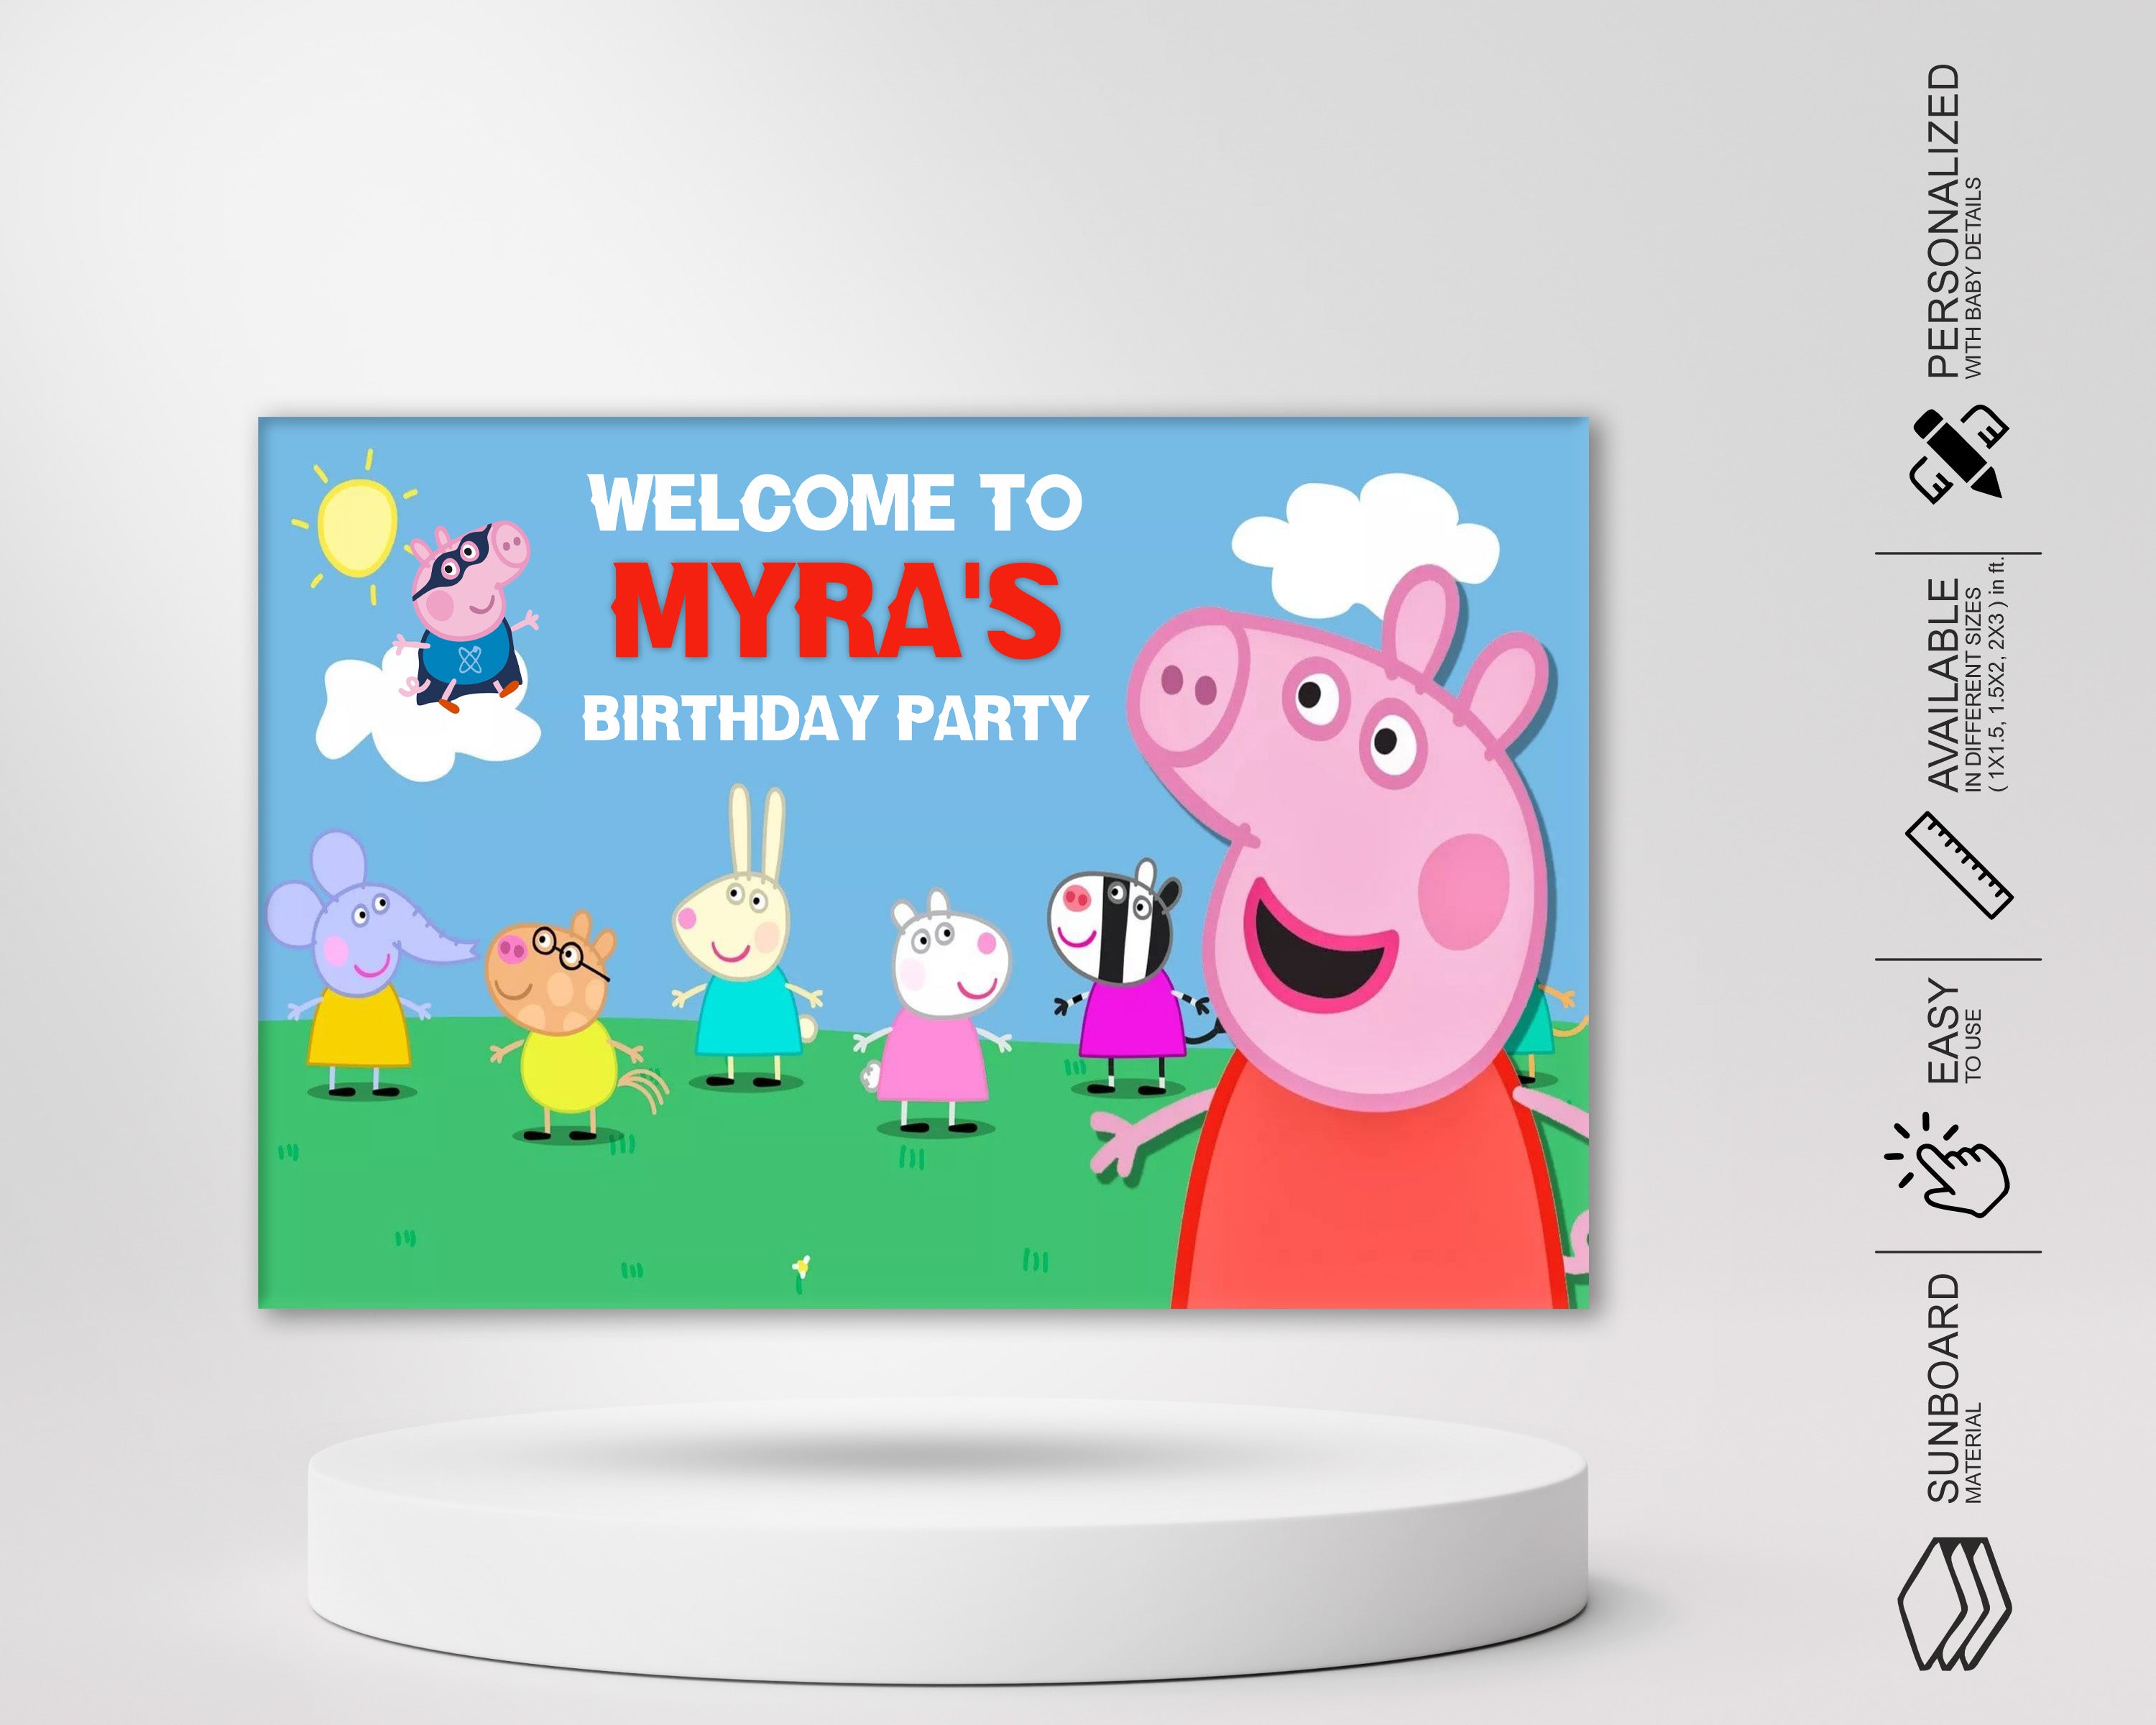 Welcome to Peppa Pig on ! 